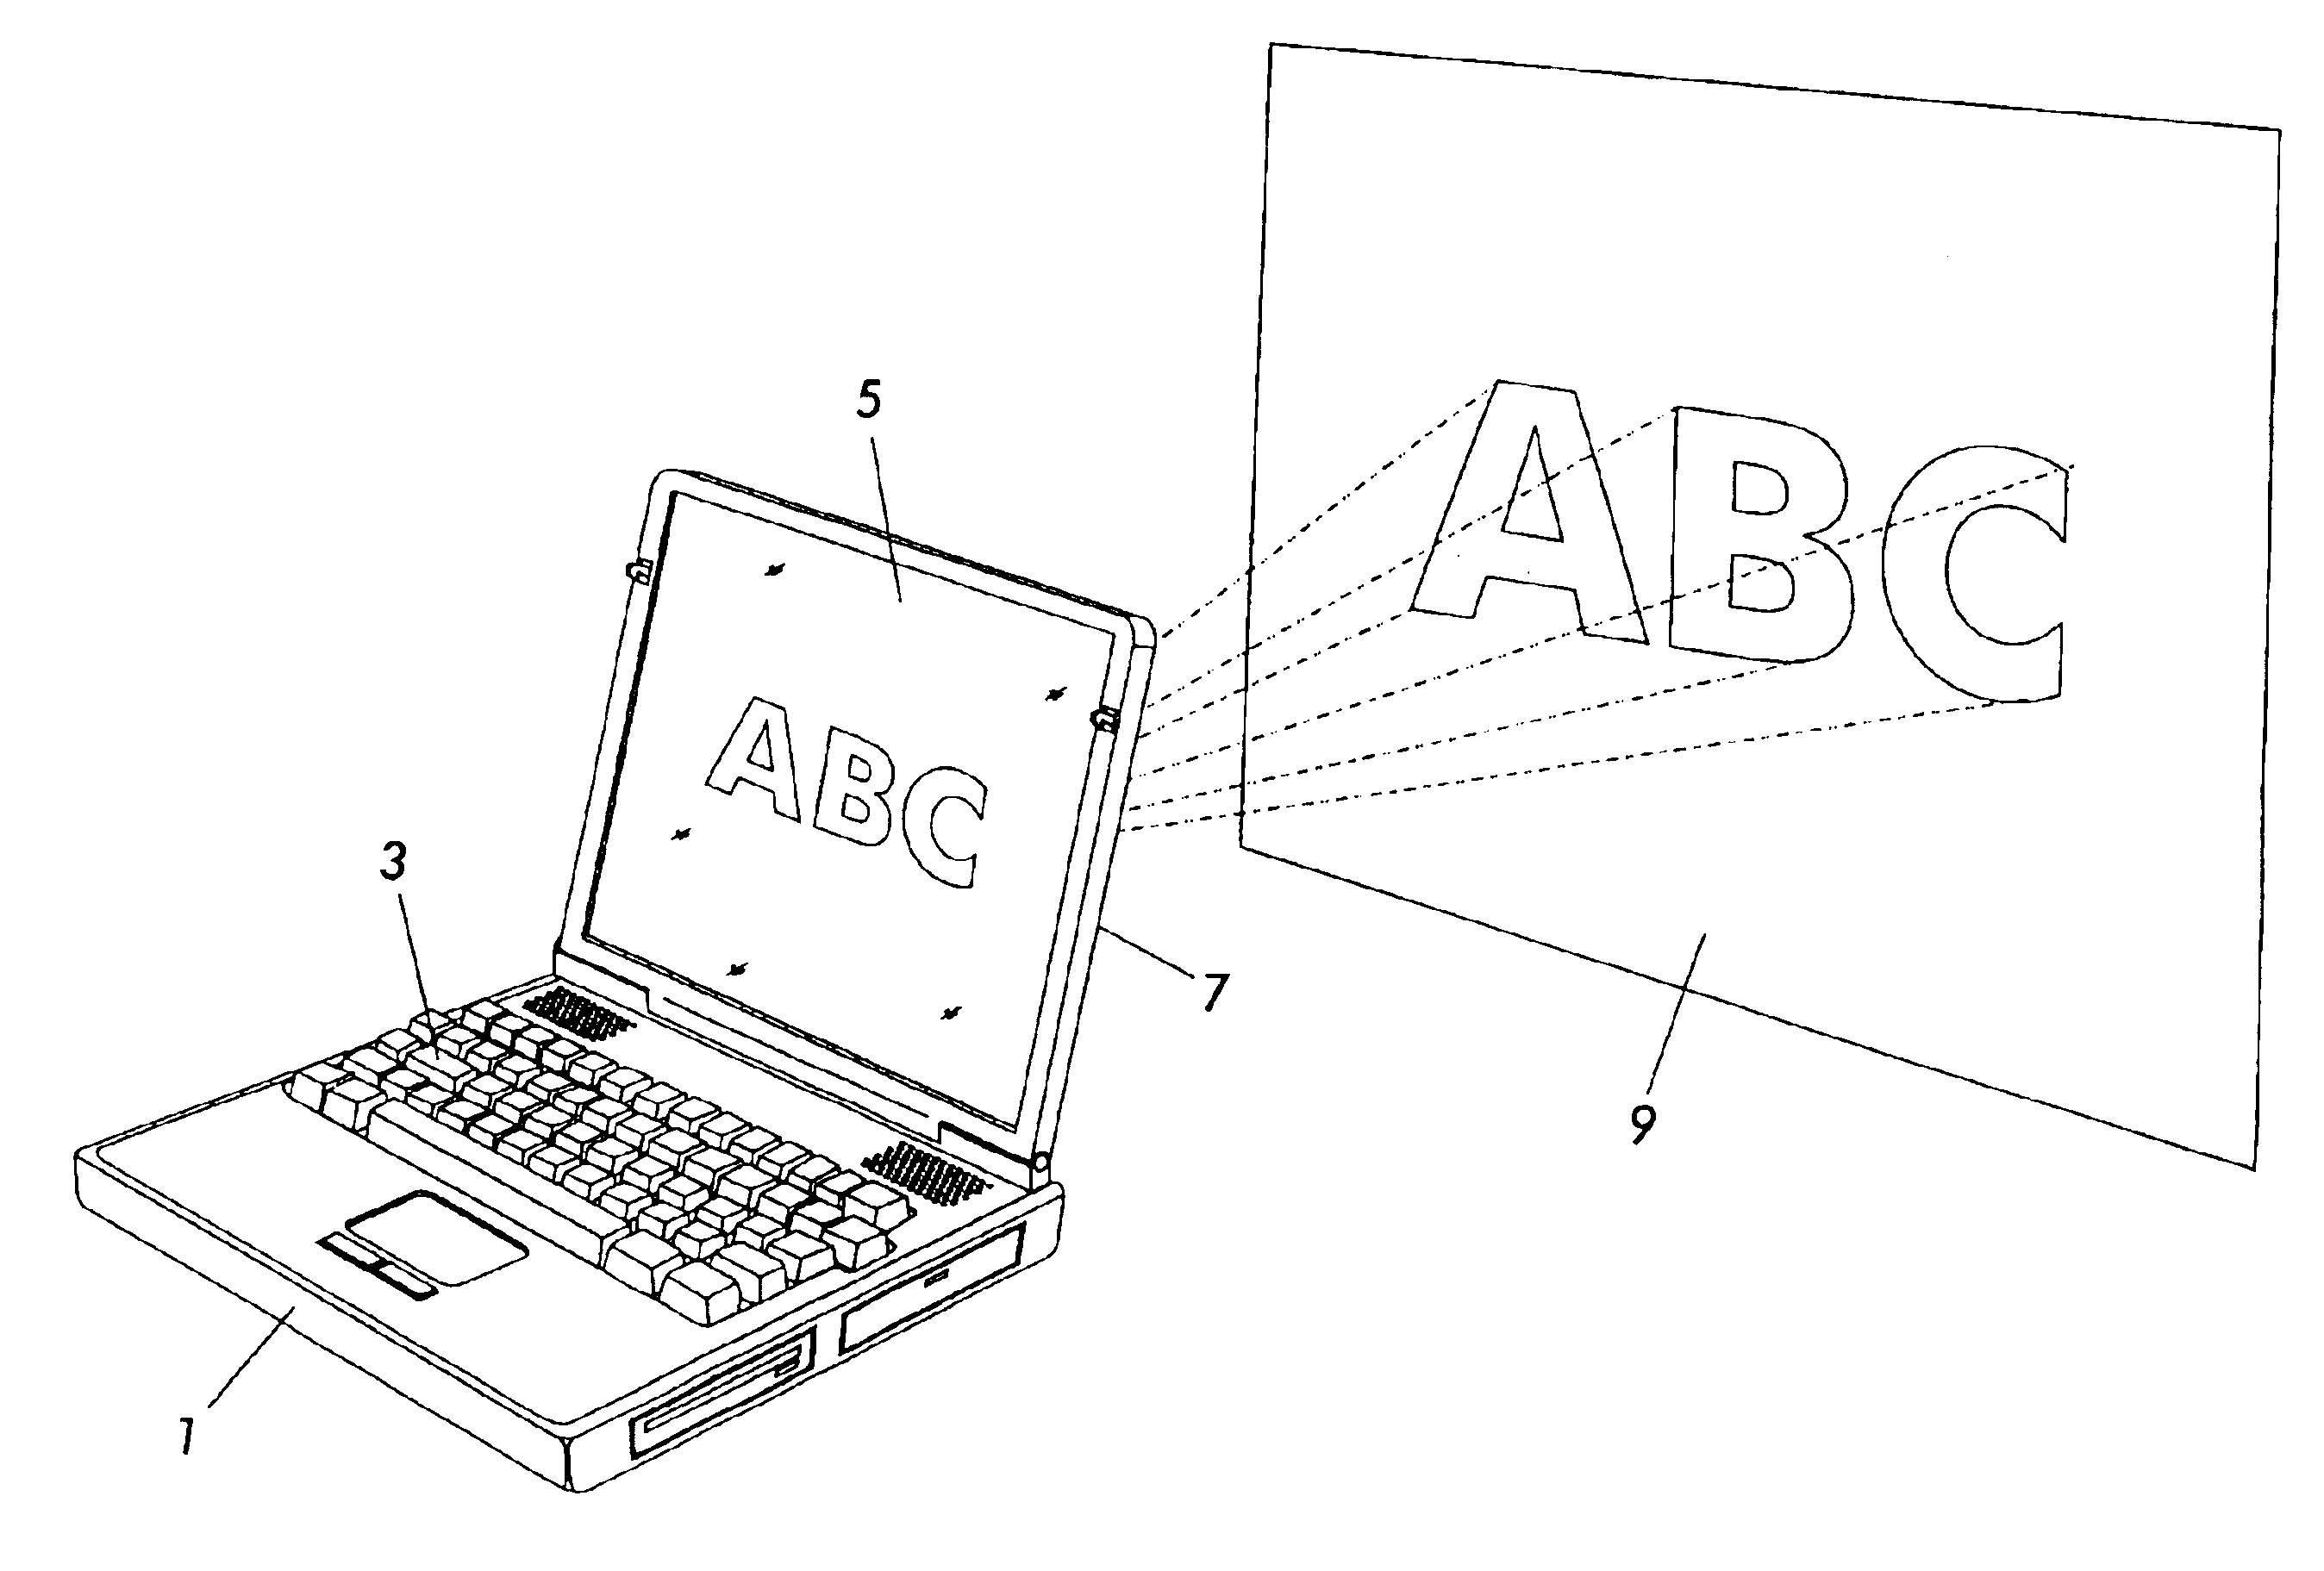 Portable personal computing device with fully integrated projection display system